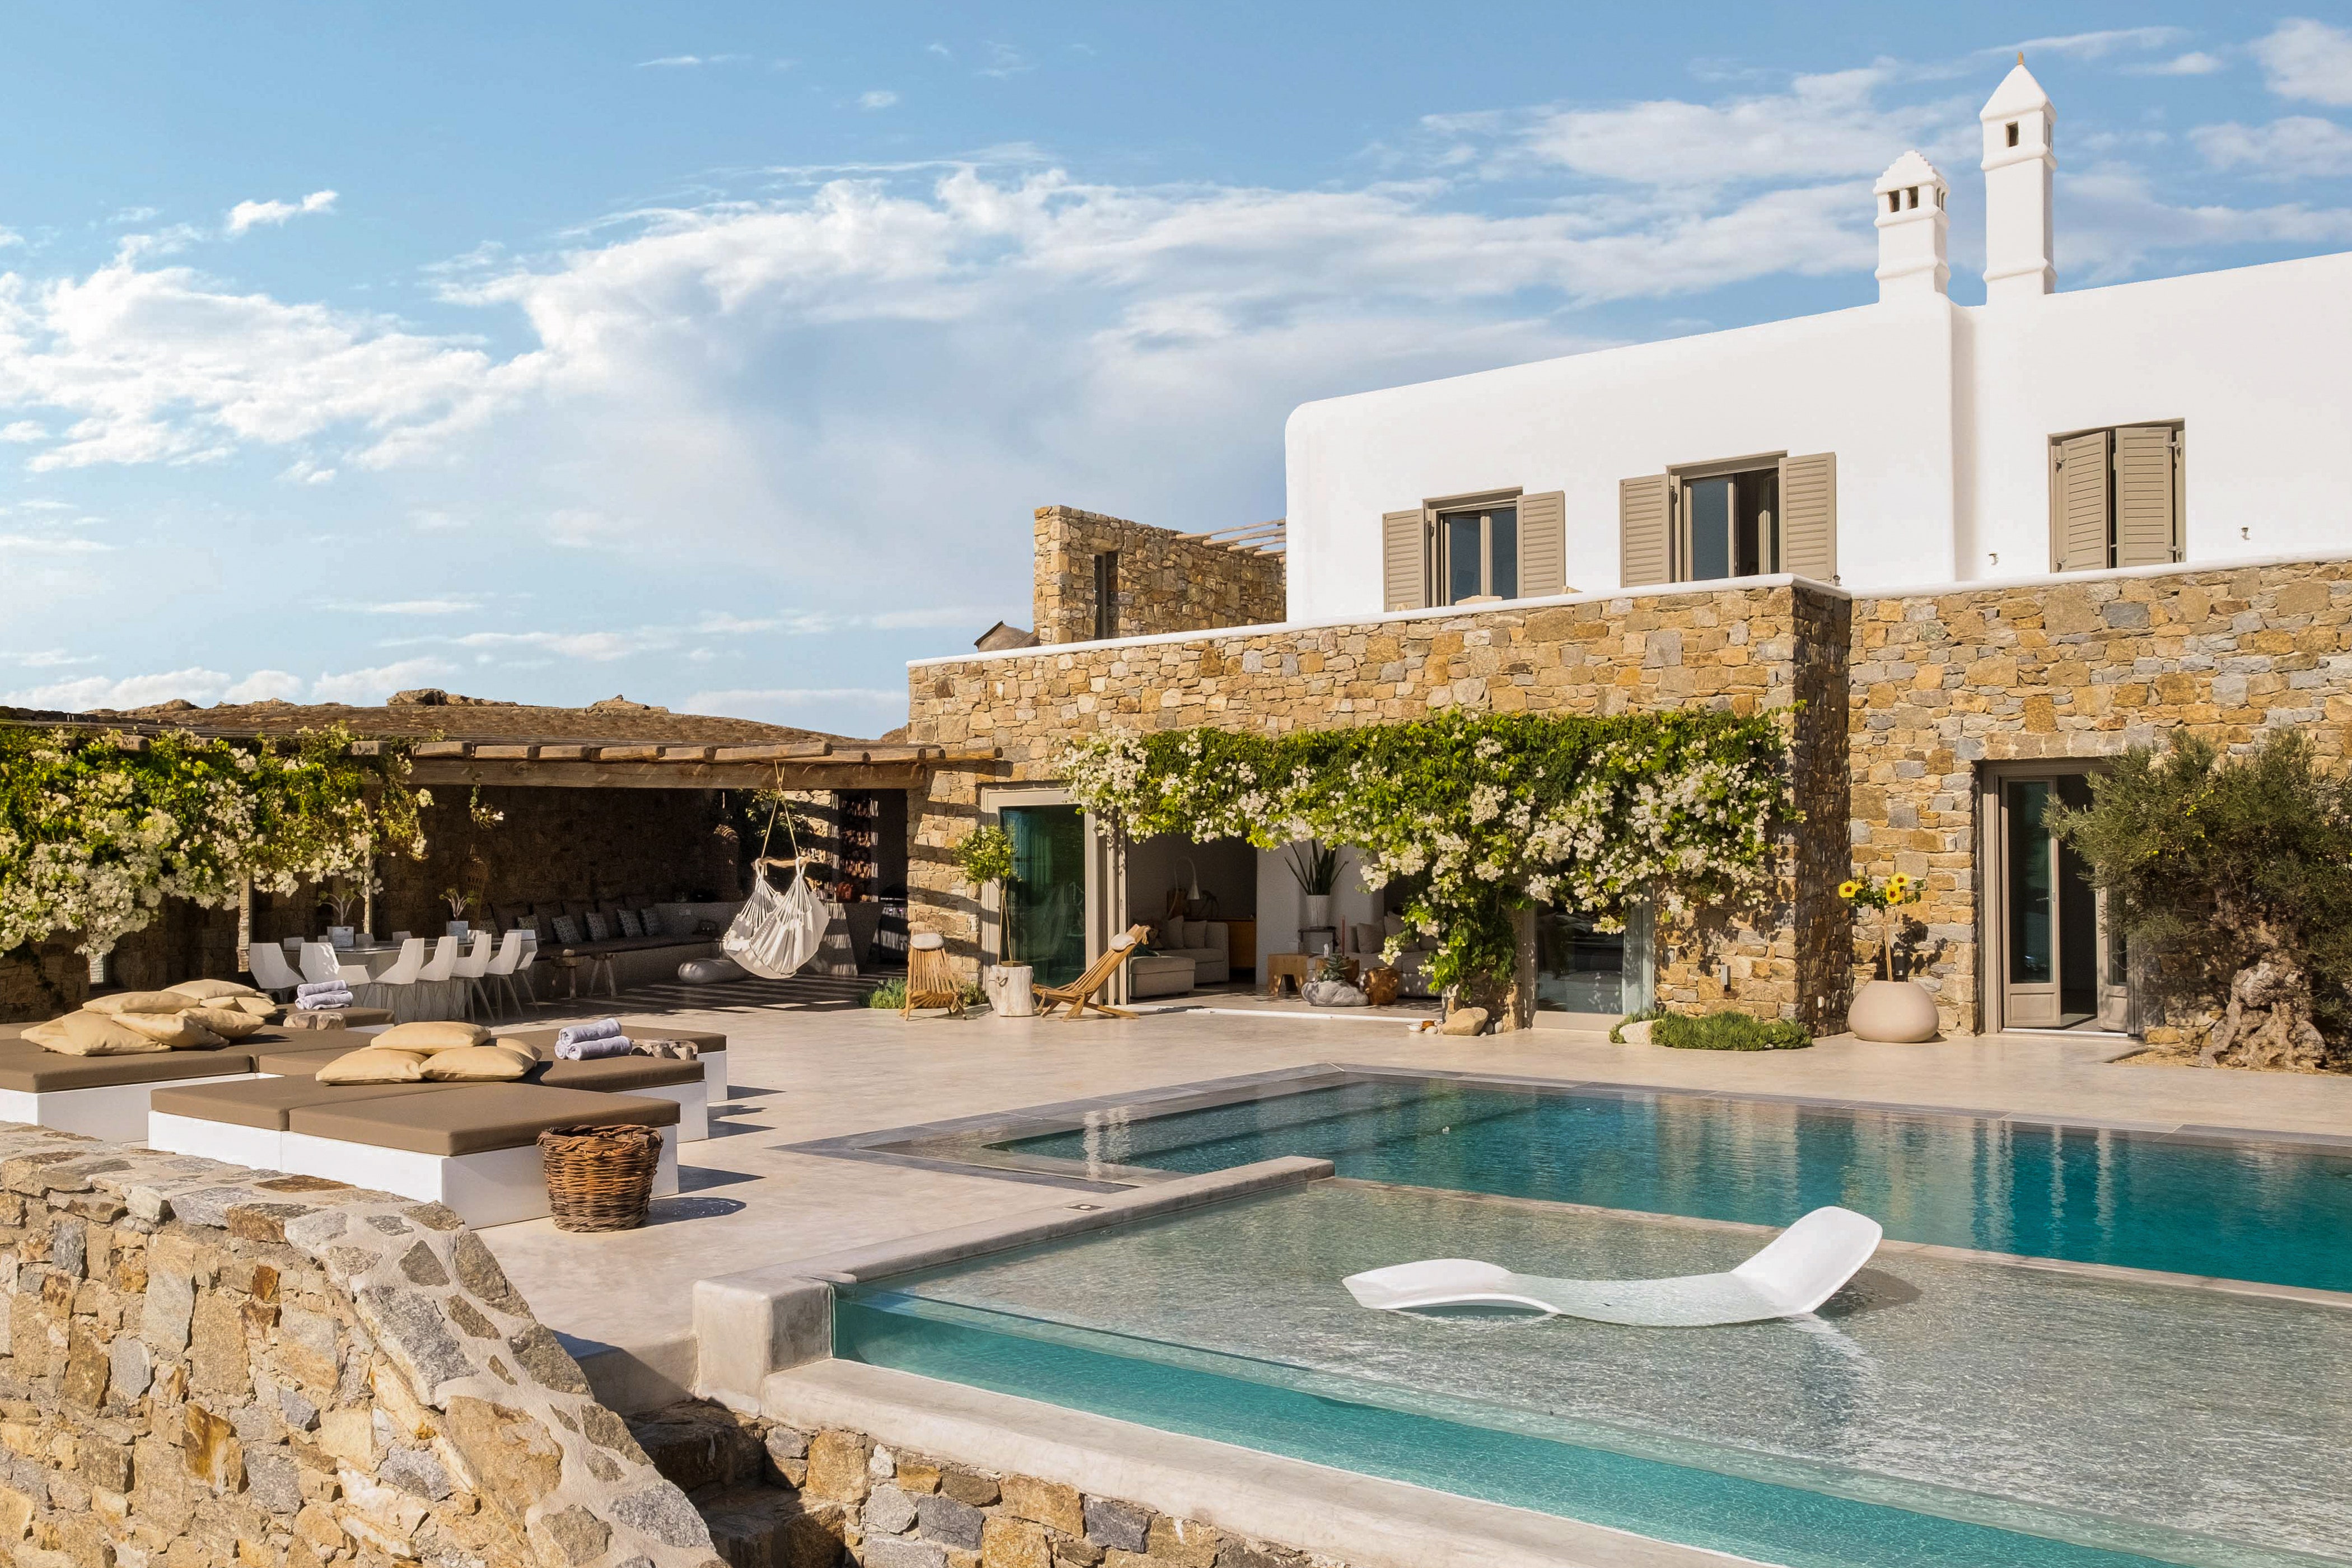 <p><strong>Mykonos</strong></p> <p>Climb up a hillside in Mykonos and land at Villa Fleur—a beautifully designed, six-bedroom stone house. Minimal interiors, natural elements, and white linens give the inside space a fresh, zen-like feel. Outside is where much of the holiday happens with a spacious al fresco dining area seating 12, plus outdoor living space, a rooftop terrace, garden, and a heated infinity pool. Housekeeping and airport transfers are included in your stay with the option to hire a private chef available.</p> <p><strong>Sleeps:</strong> 12<br> <strong>Price:</strong> From $4,350 a night</p> <div class="callout"><p><a href="https://cna.st/affiliate-link/7EaqjGTiGVEZLzw7dtDbaNV19tv3GB292XQUmXXjBeZmXJw4YG2Bg8vEz9PqTk1F9gHnoRHEb7CCs1QWQeQmYFuB1zhVT1QmTRGFYqyv8aAeti45wvAURVSEydCfP2trWxsmT4r7MBbR6osLvBgfA" rel="sponsored" title="Book now at Airbnb">Book now at Airbnb</a></p> </div><p>Sign up to receive the latest news, expert tips, and inspiration on all things travel.</p><a href="https://www.cntraveler.com/newsletter/the-daily?sourceCode=msnsend">Inspire Me</a>